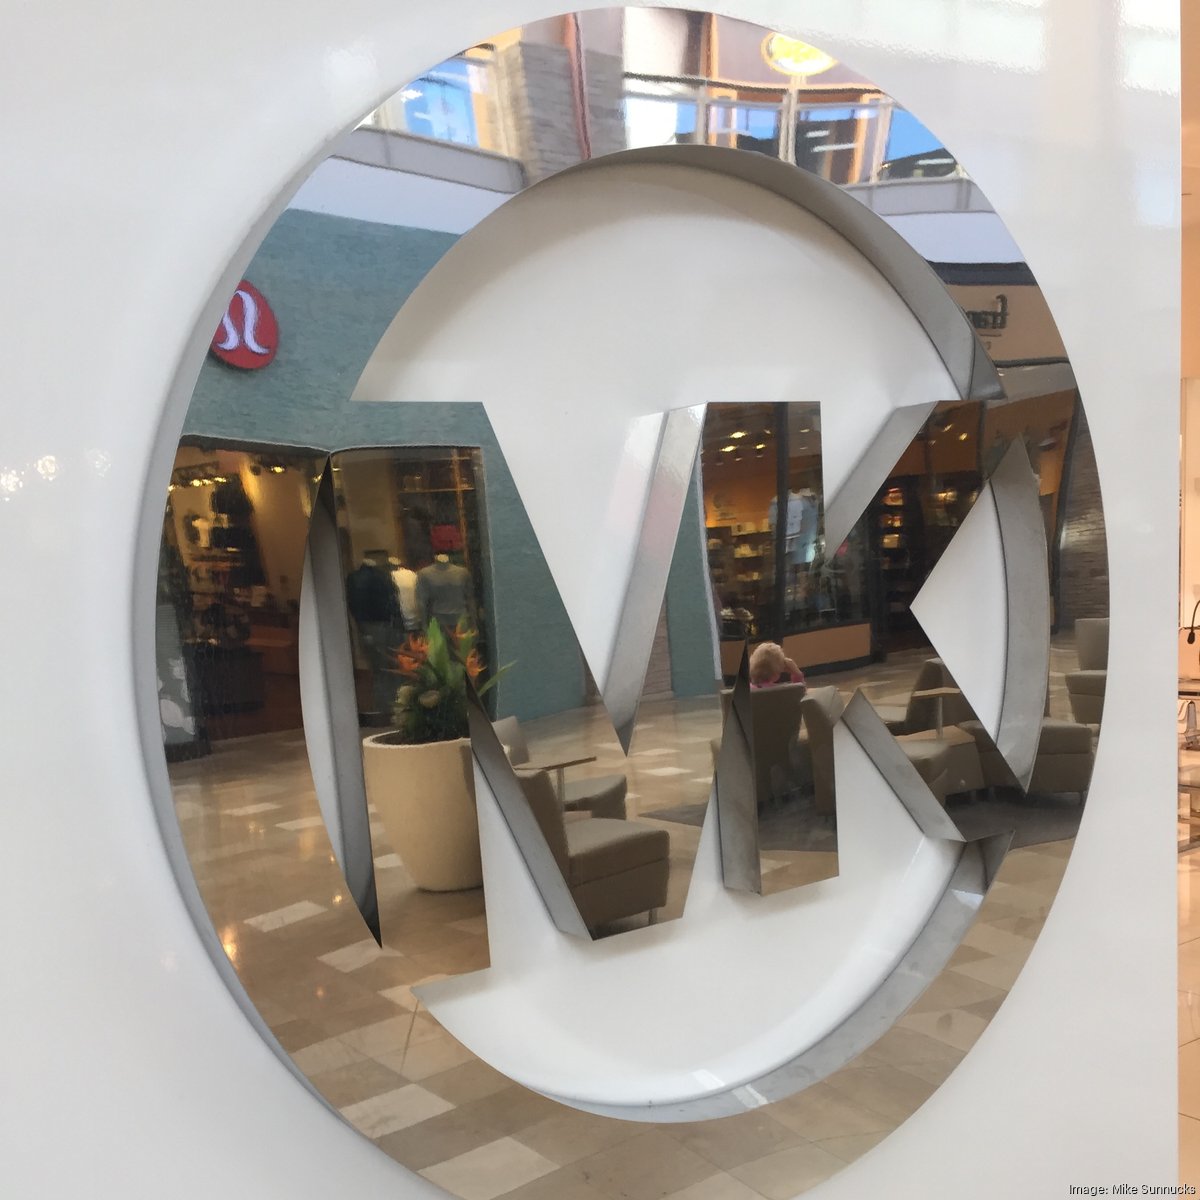 Up to 125 Michael Kors Stores Closing After Weak Sales